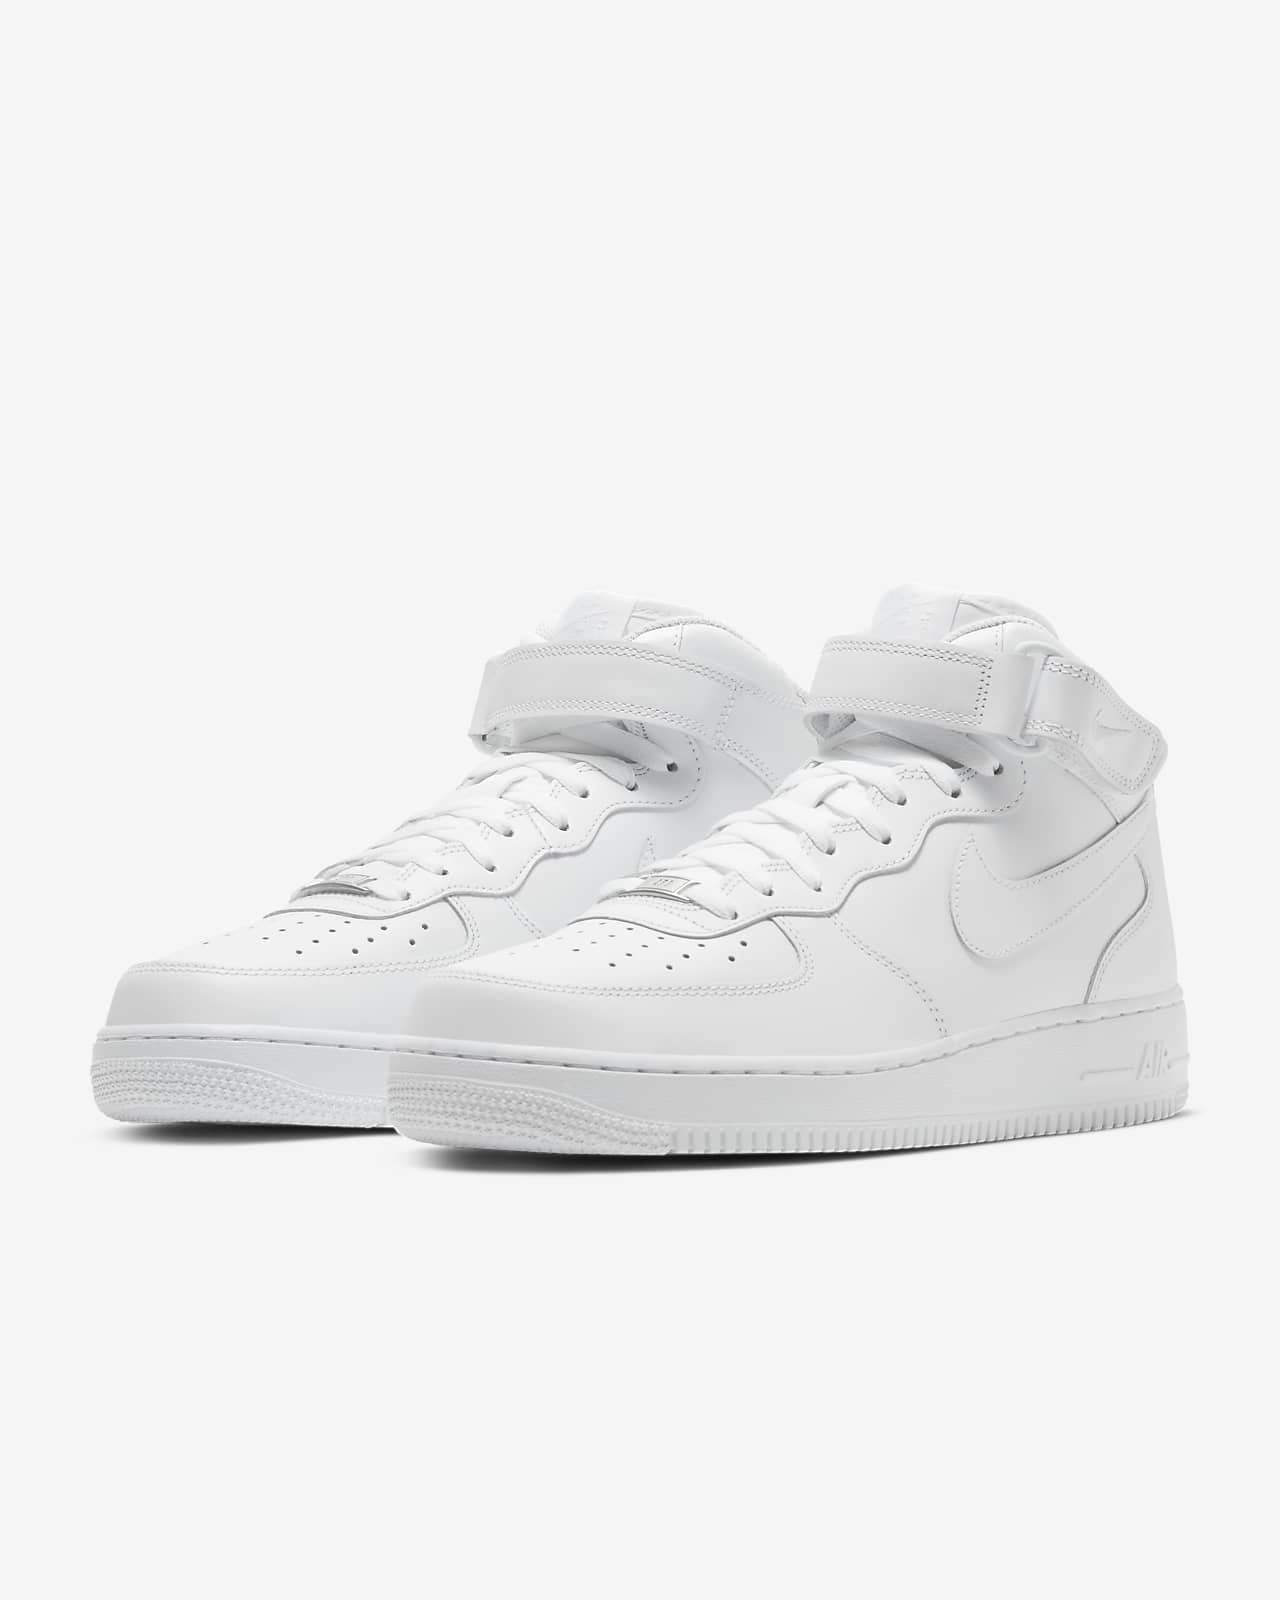 Chaussure Nike Air Force 1 Mid '07 pour 